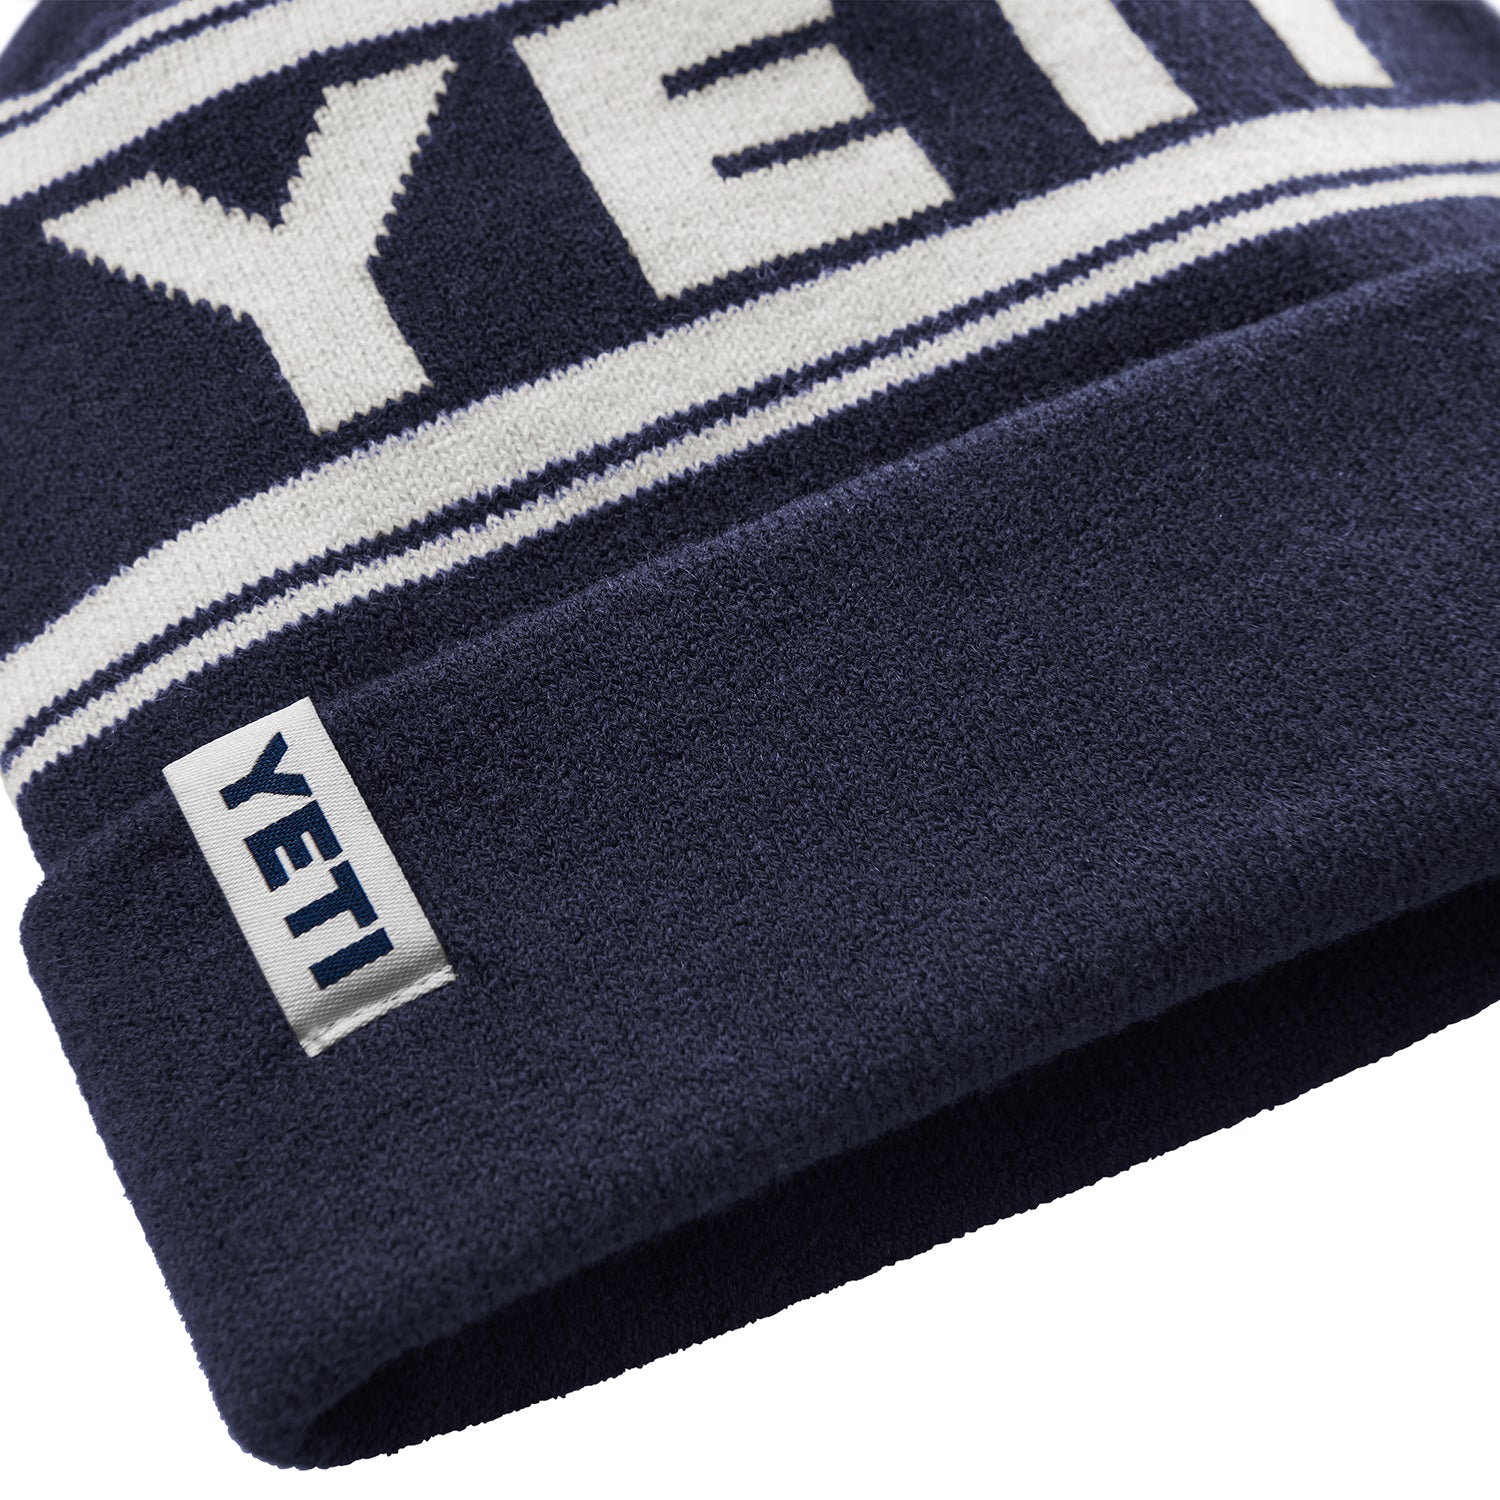 210173-Fall-Apparel-DealerImages-YETI-F21-Hats-Retro-Knit-Beanie-Navy-White-Detail-0508-Layers-F-2400x2400.jpeg